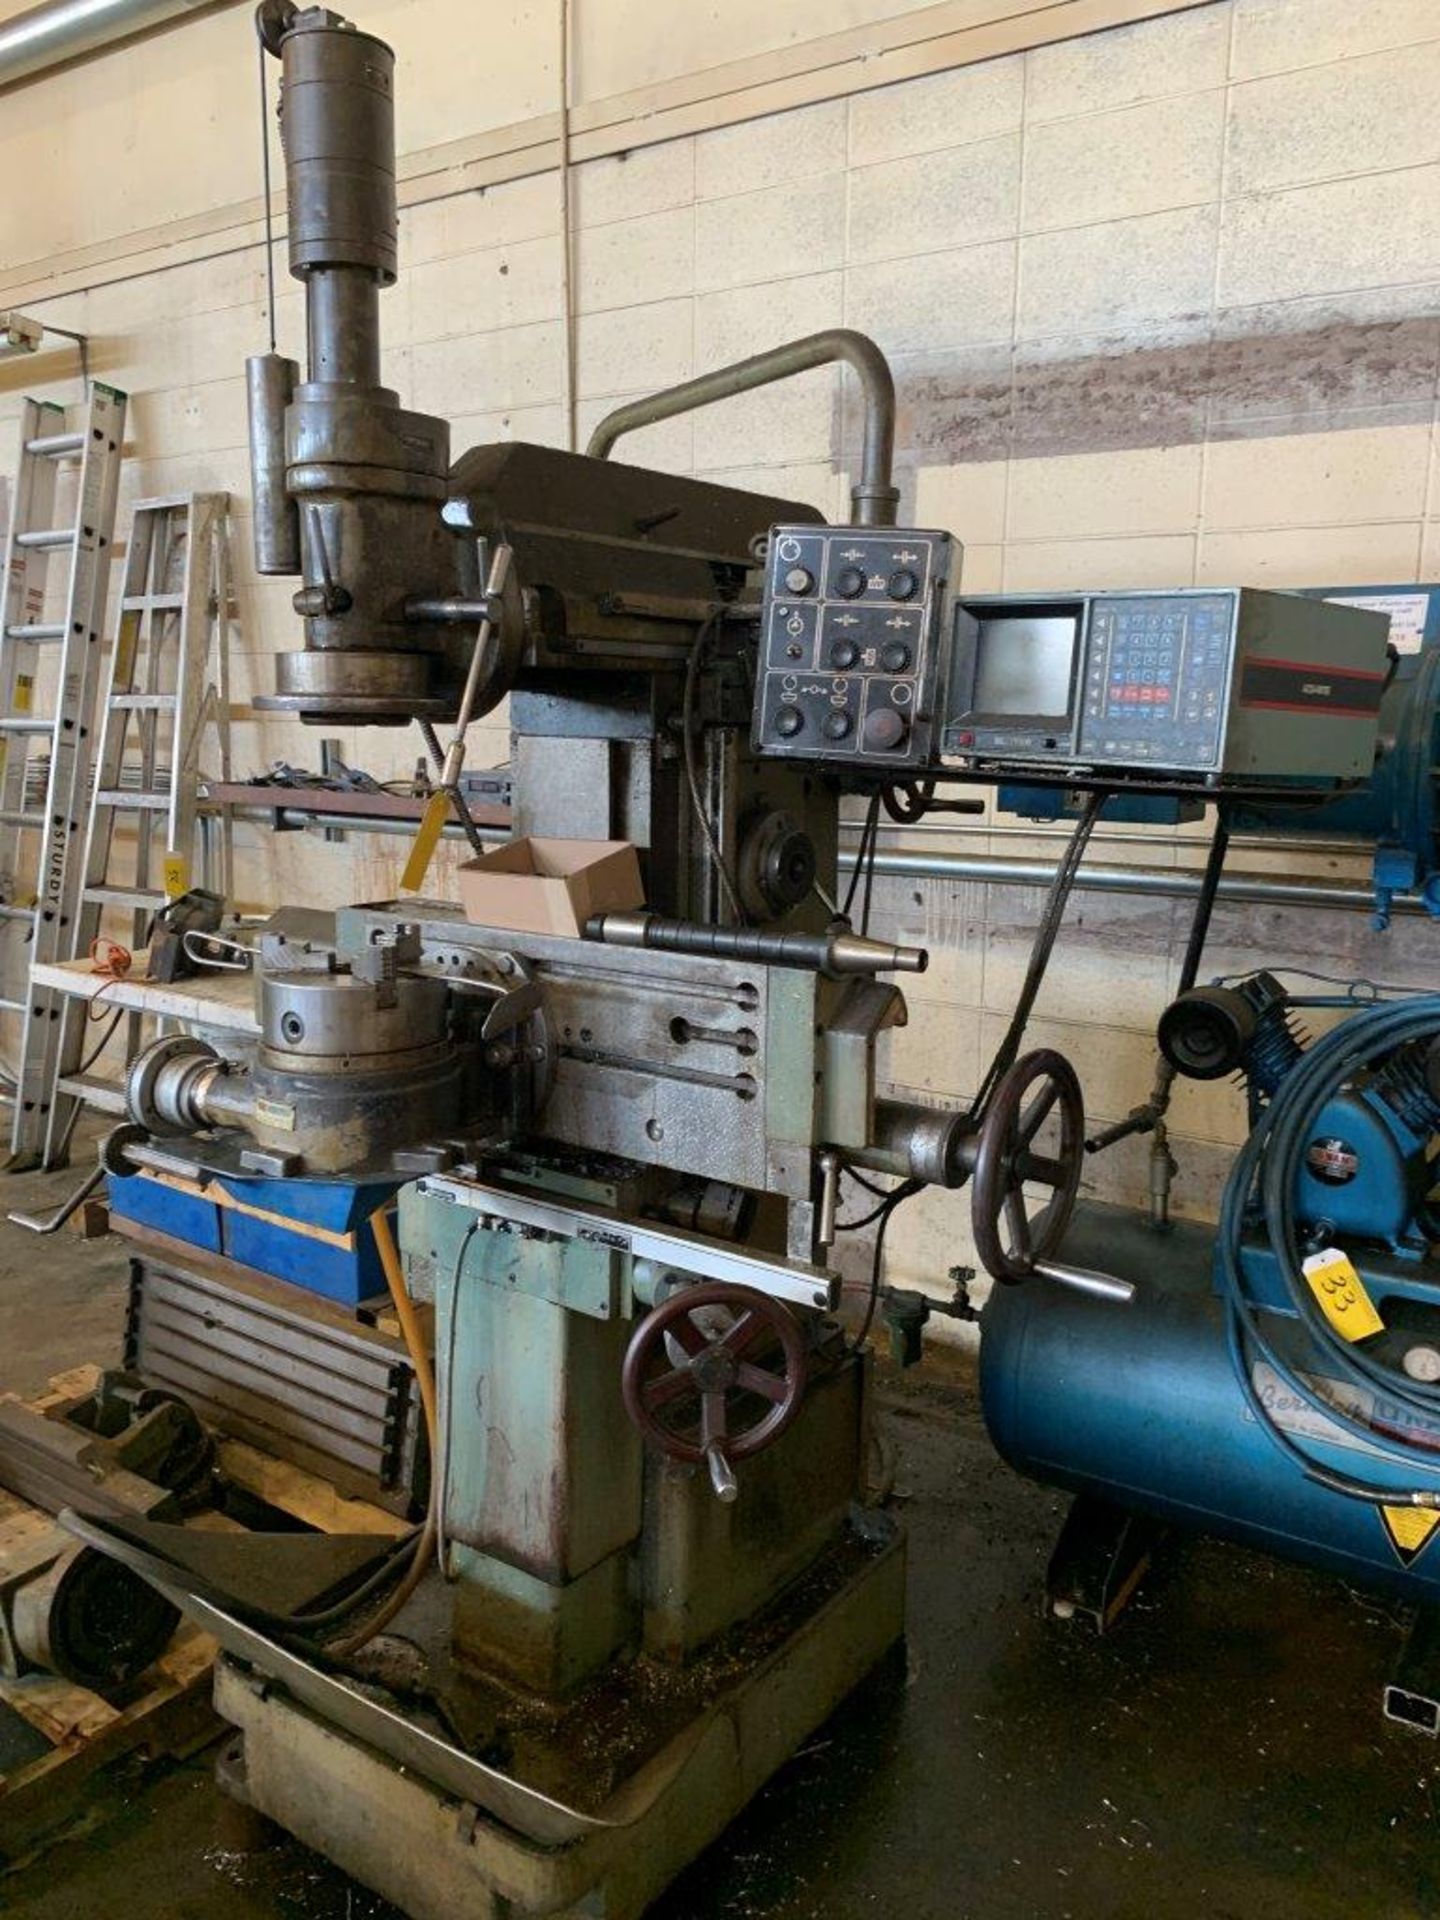 1991 STANKO DECKEL TYPE MILL W/INDEXING CHUCK, PLUS 2-BOLT ON TABLES C/W TOOLING AND EXTRA TABLES.